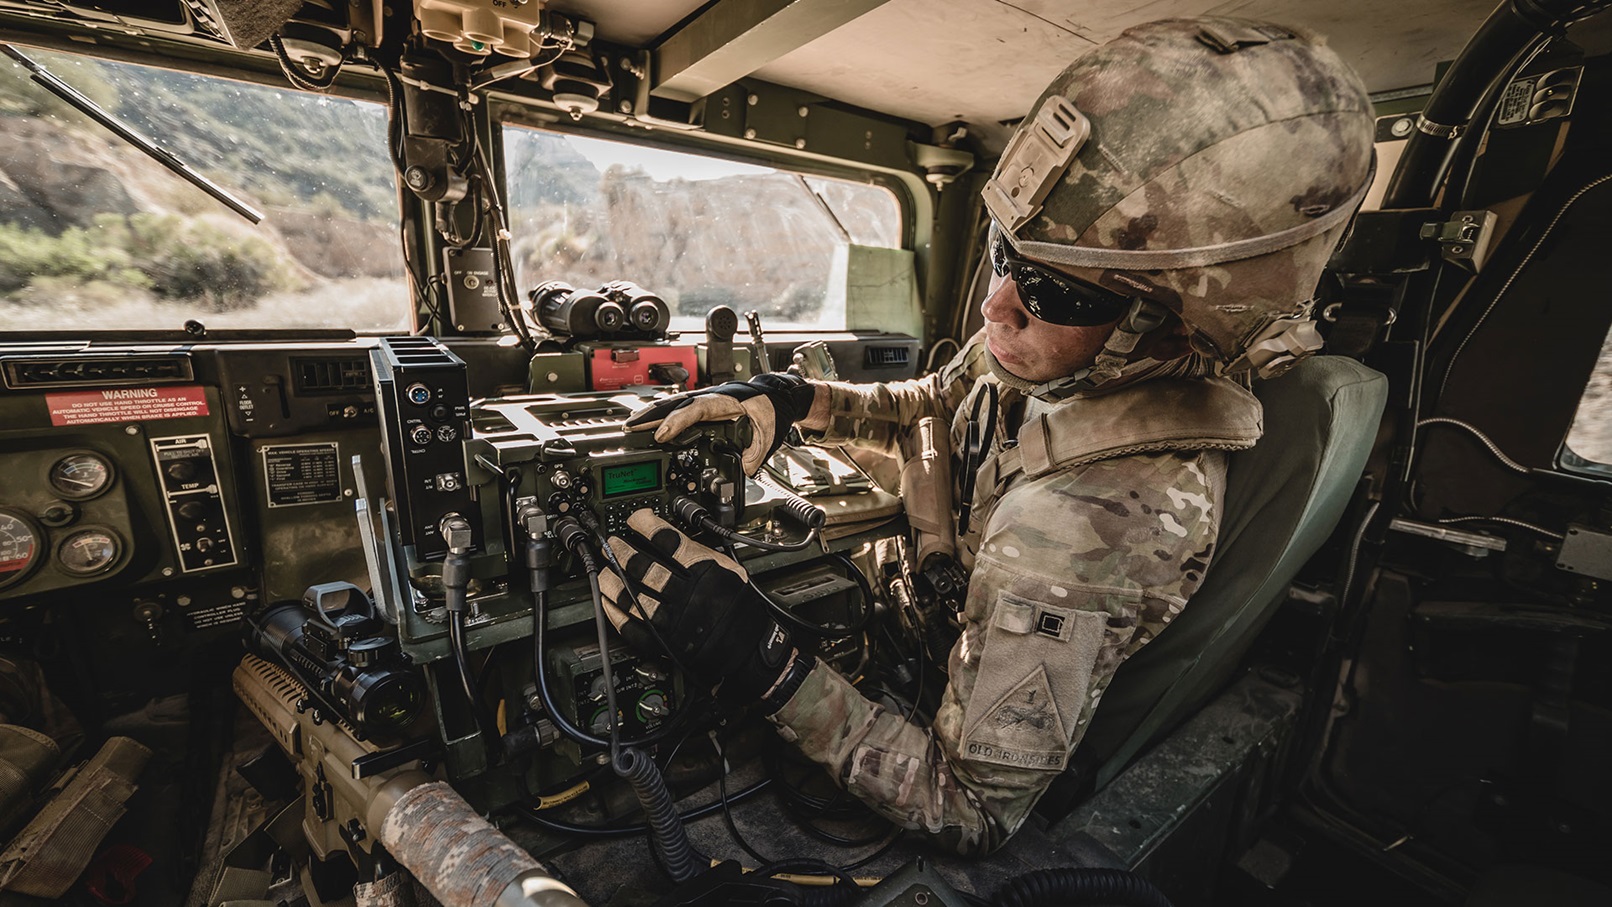 An optional vehicle mounting kit for Collins Aerospaceâ€™s PRC-162 ground radio supports field retrofits in less than a day, providing lower life cycle costs and flexibility in deployment.